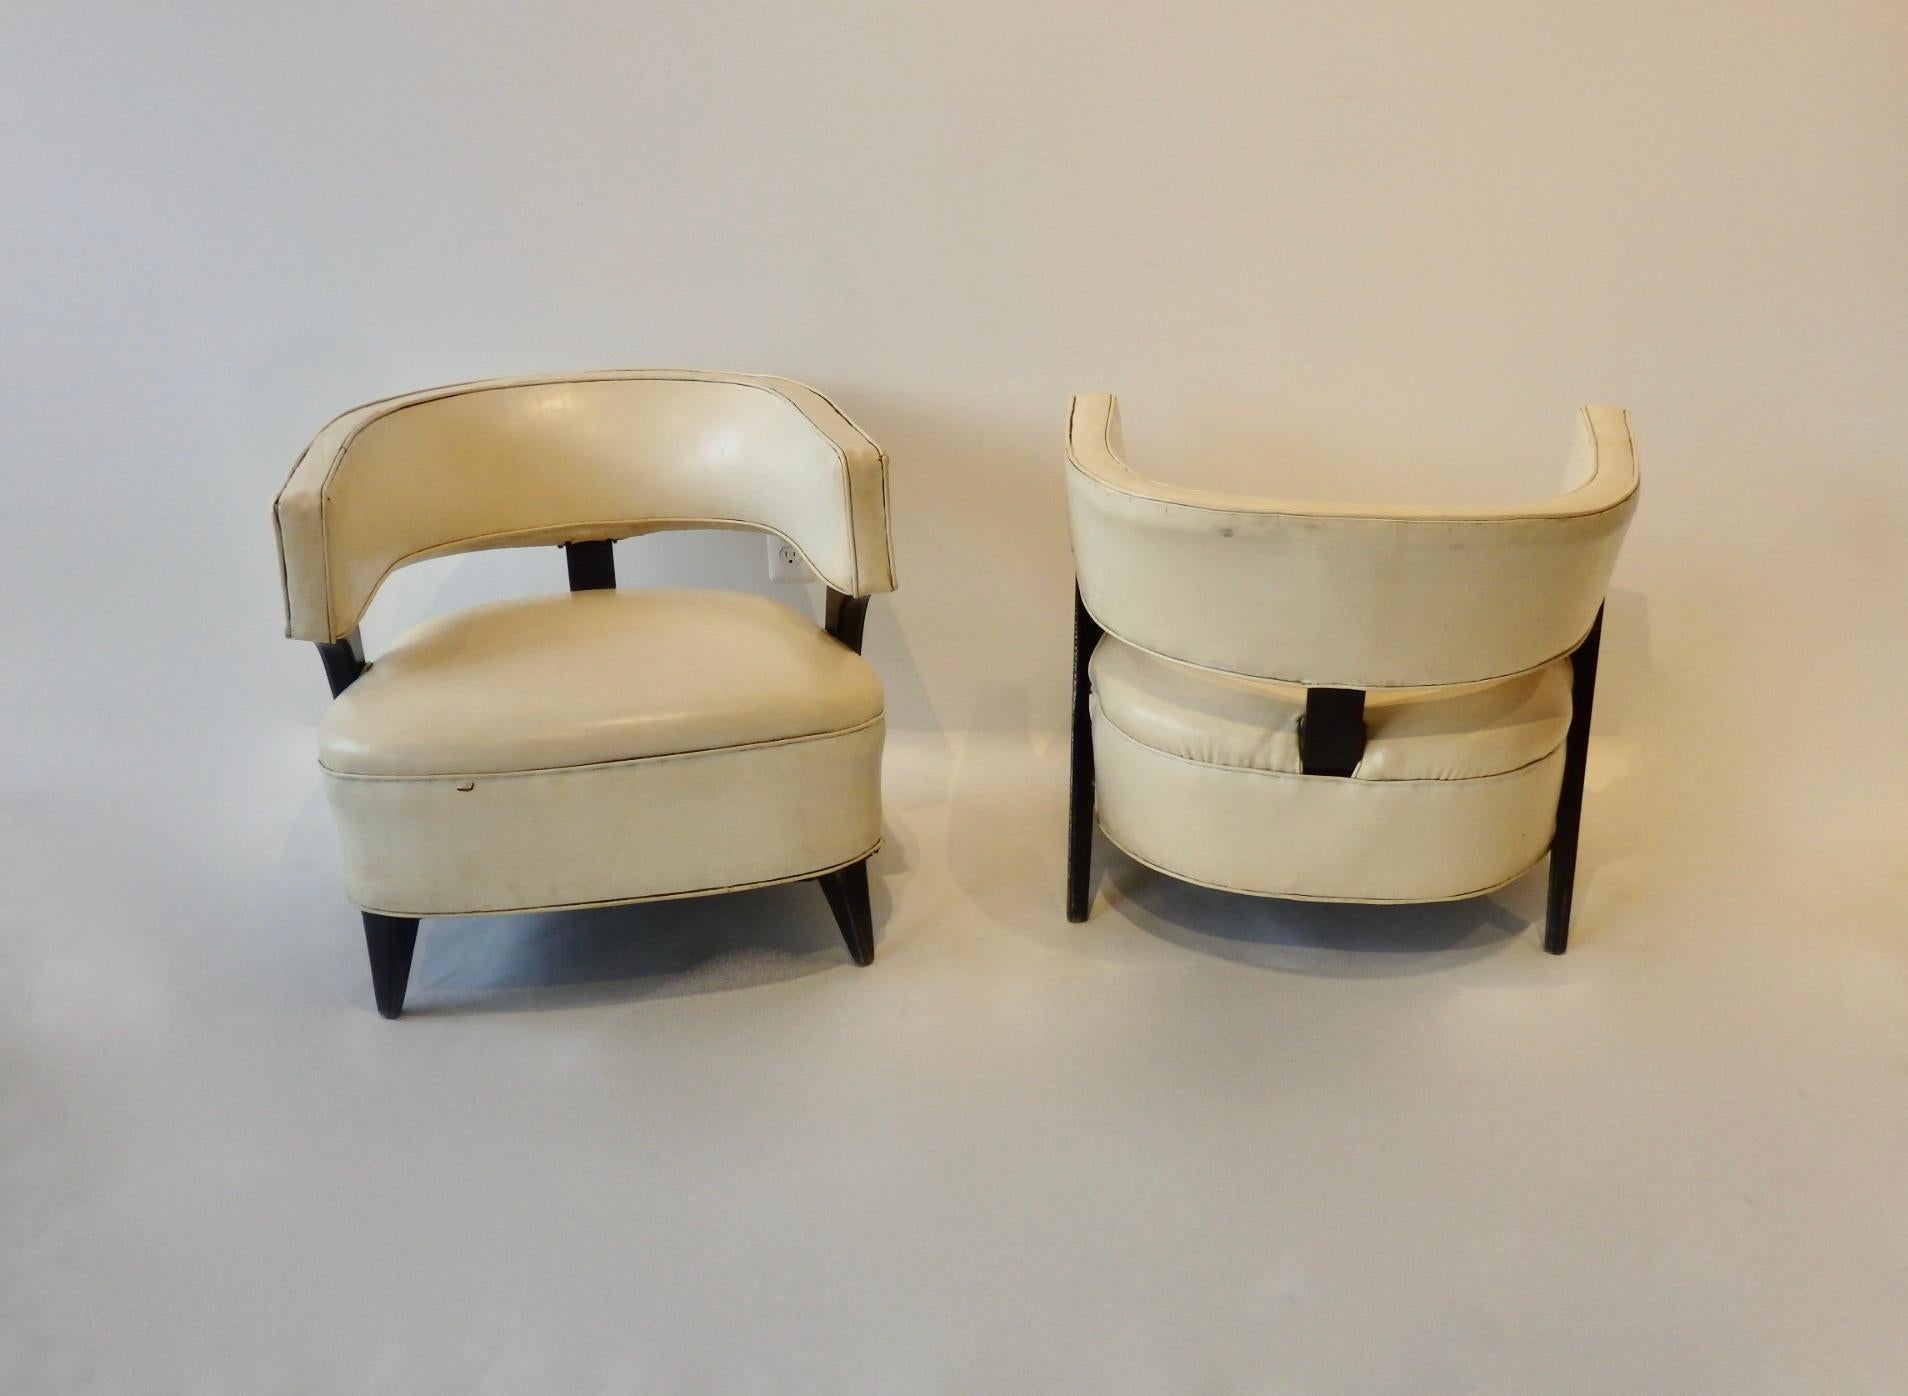 Streamlined Moderne Pair of as Found Paul Laszlo Style Art Deco Moderne Club or Lounge Chairs